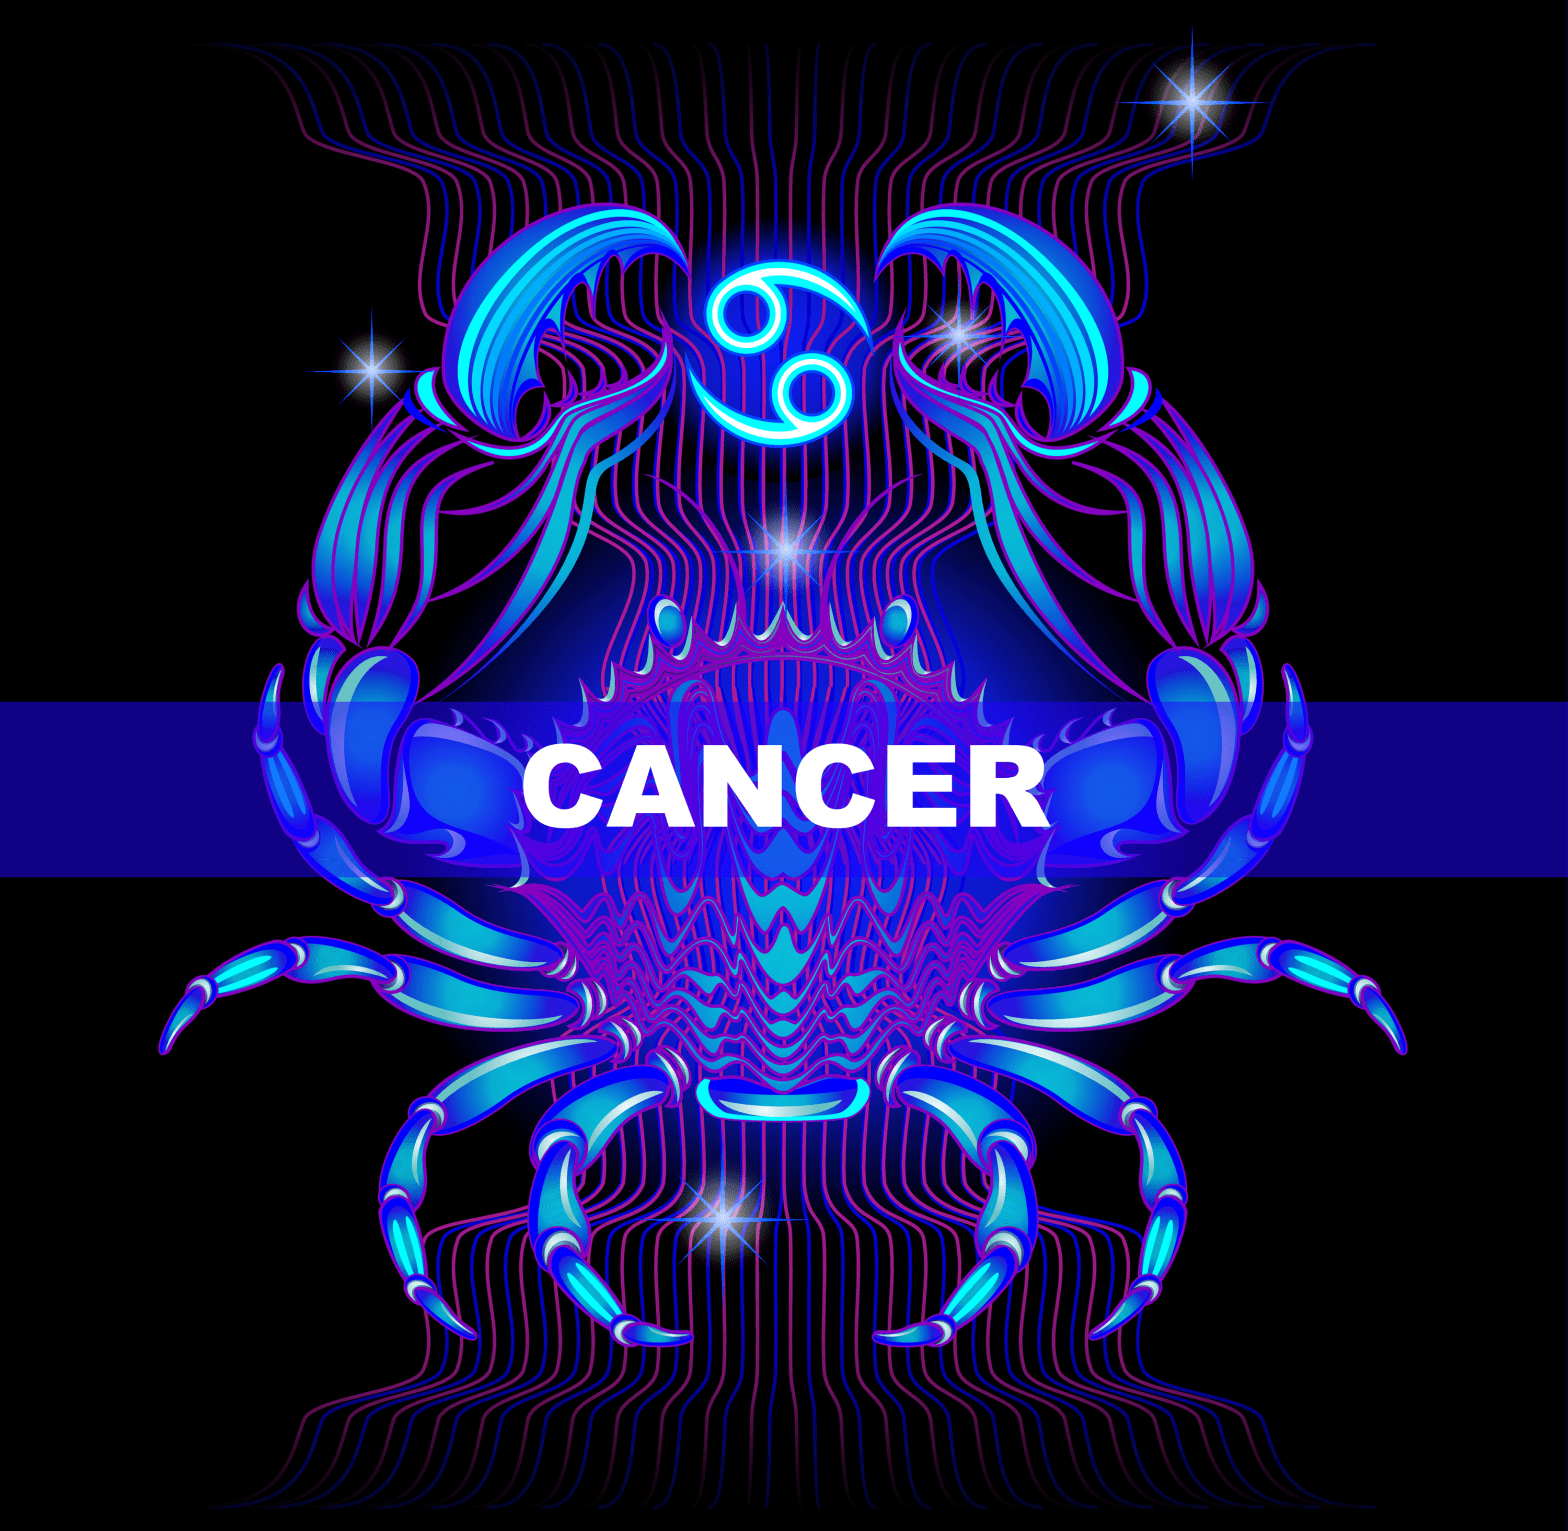 cancer daily horoscope astrotwins